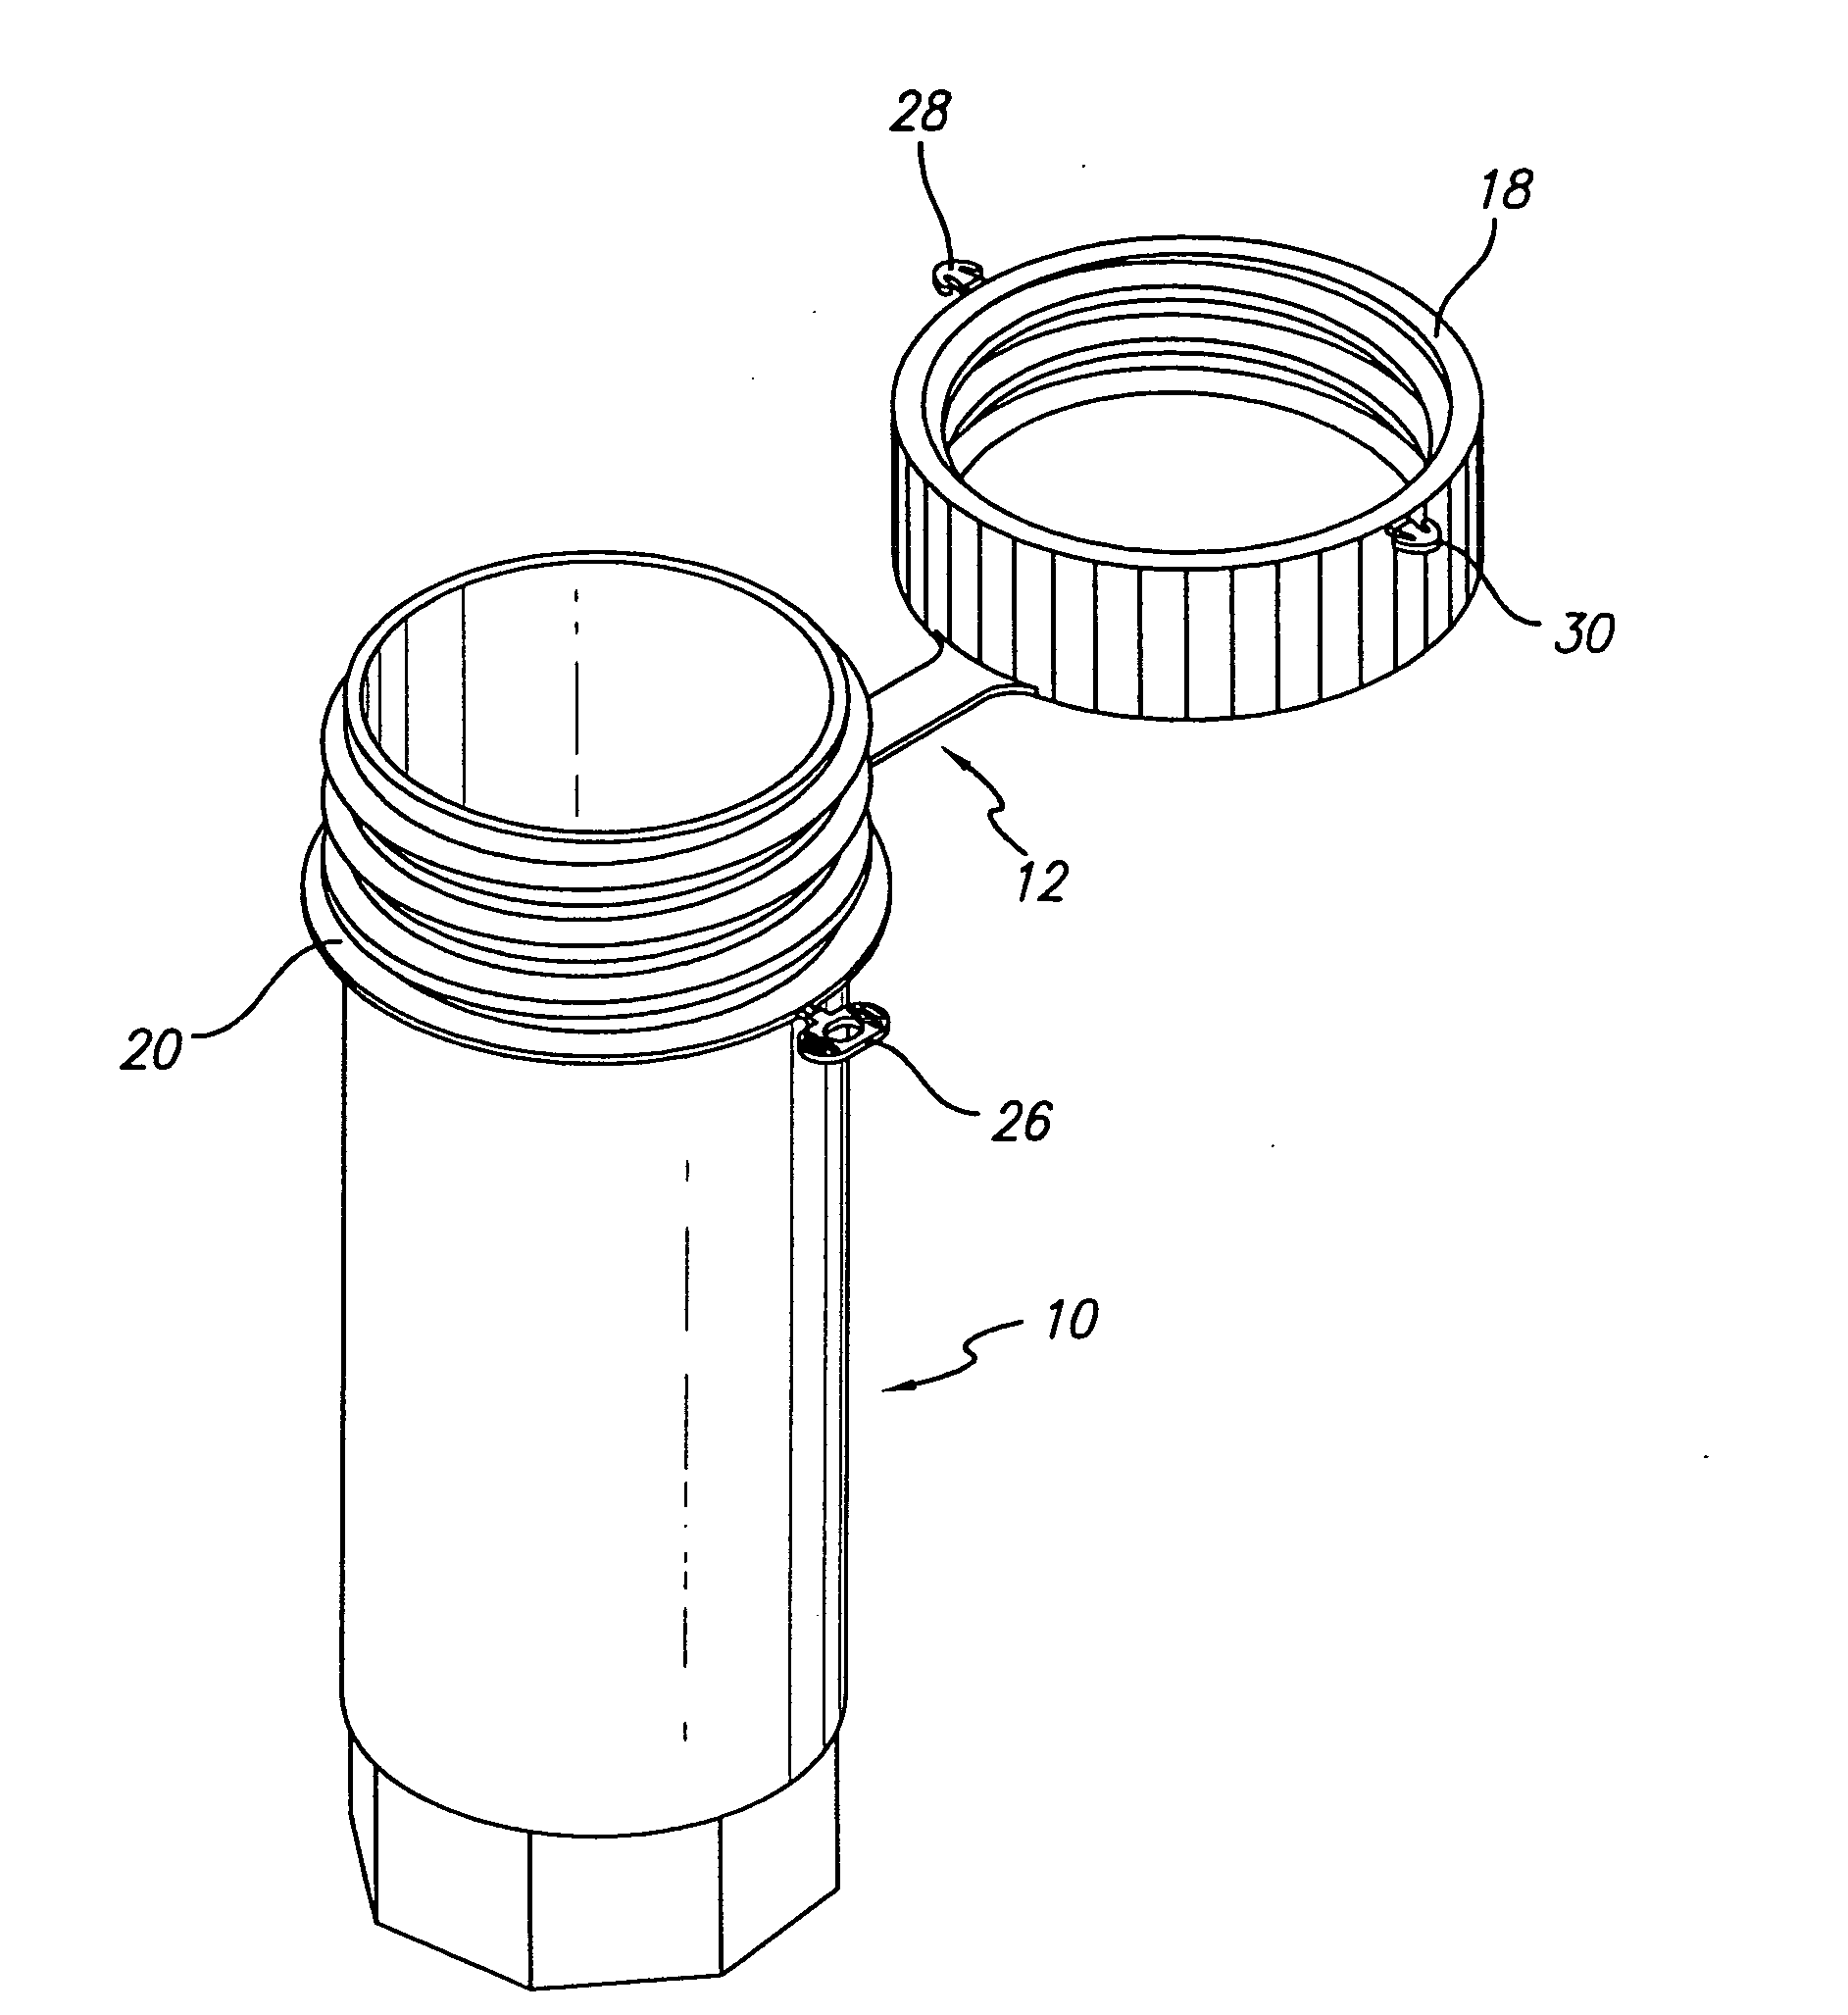 Tamper evident vial cap and integrity assurance method